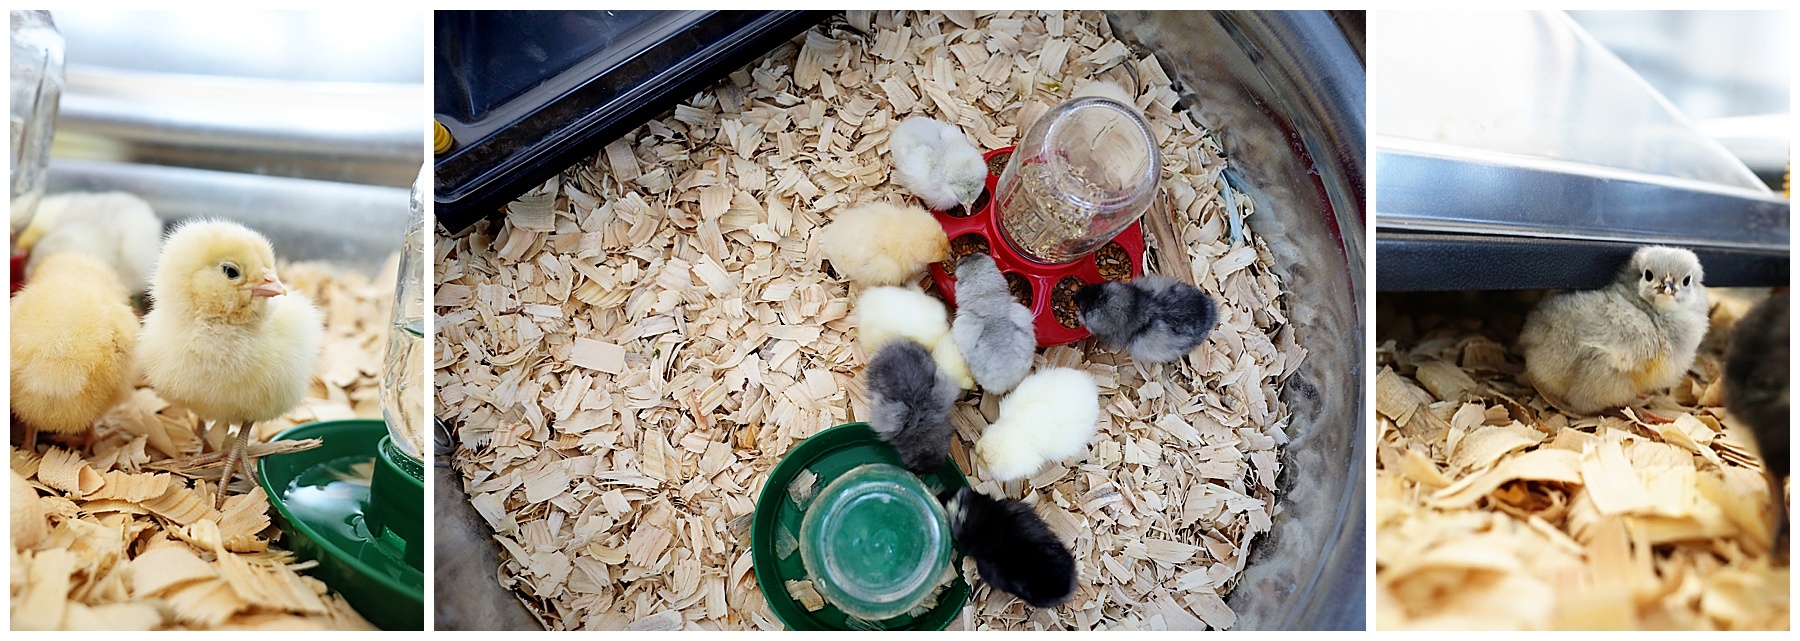 What we learned raising baby chicks